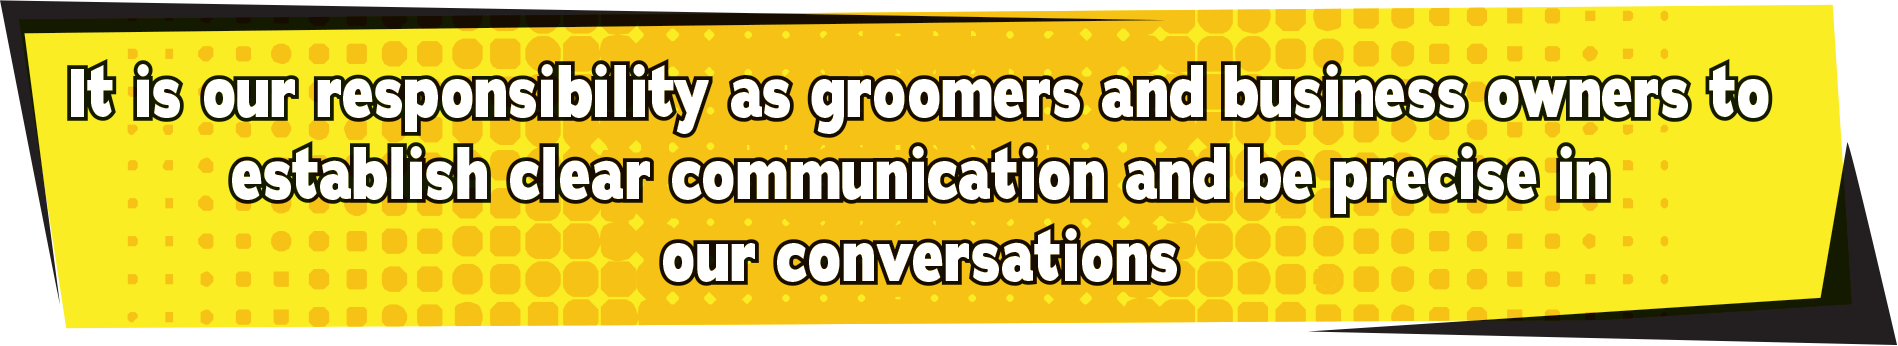 It is our resposibility as groomers and business owners to establish clear communication and be precise in our conversations